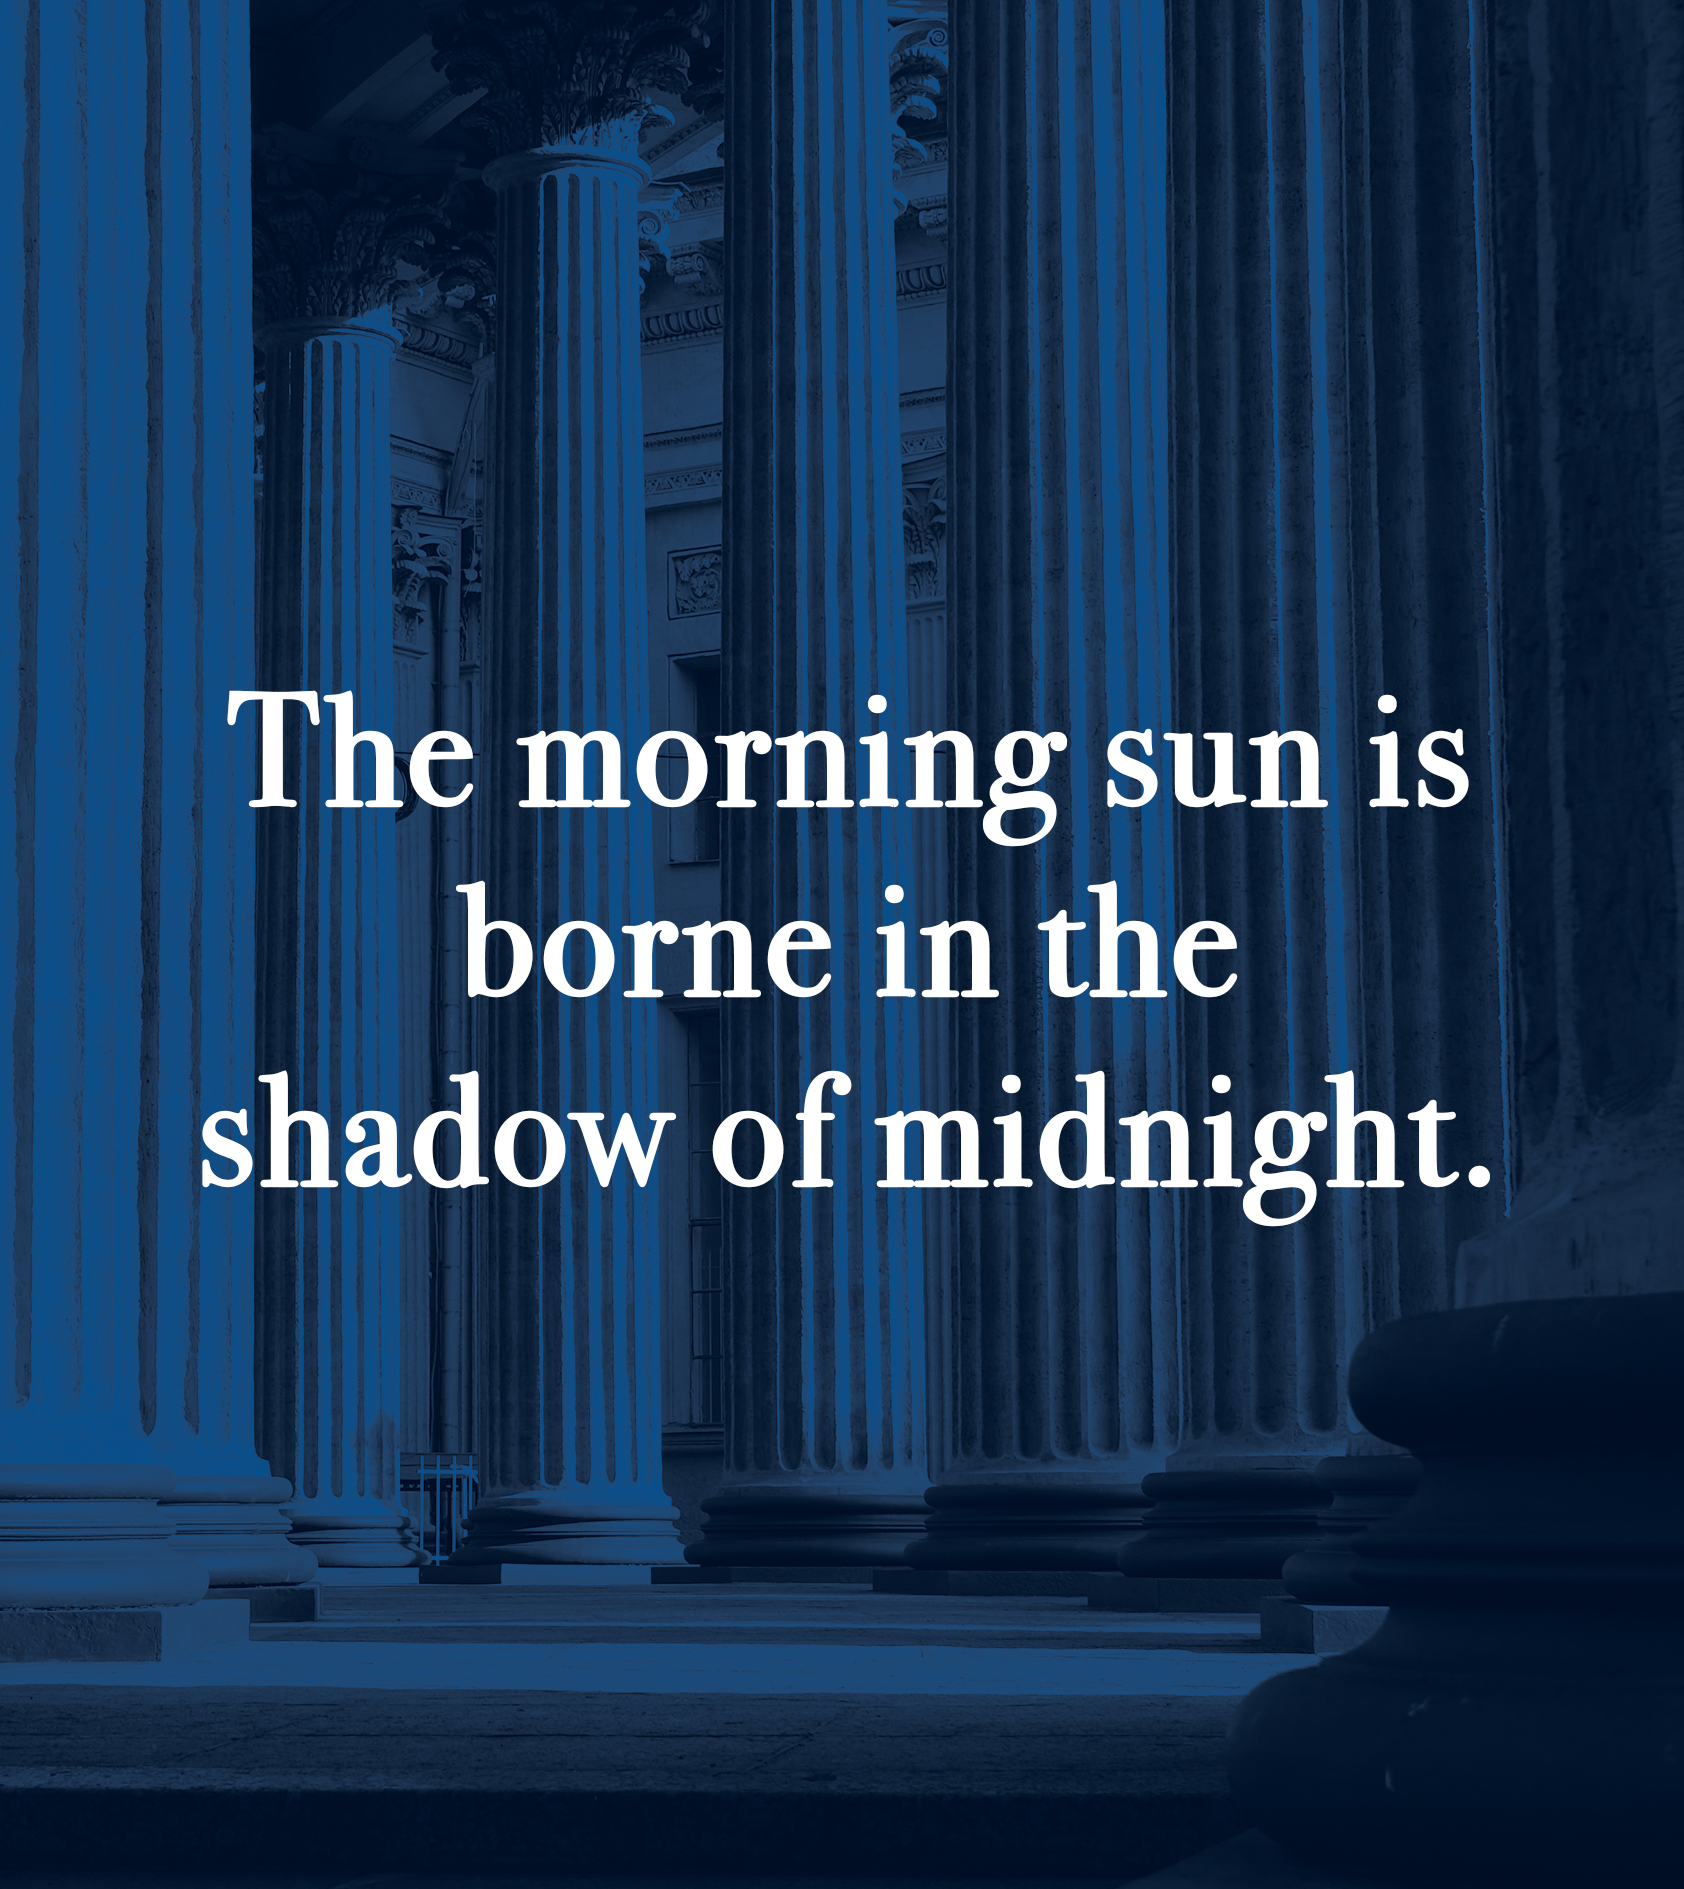 The morning sun is borne in the shadow of midnight.